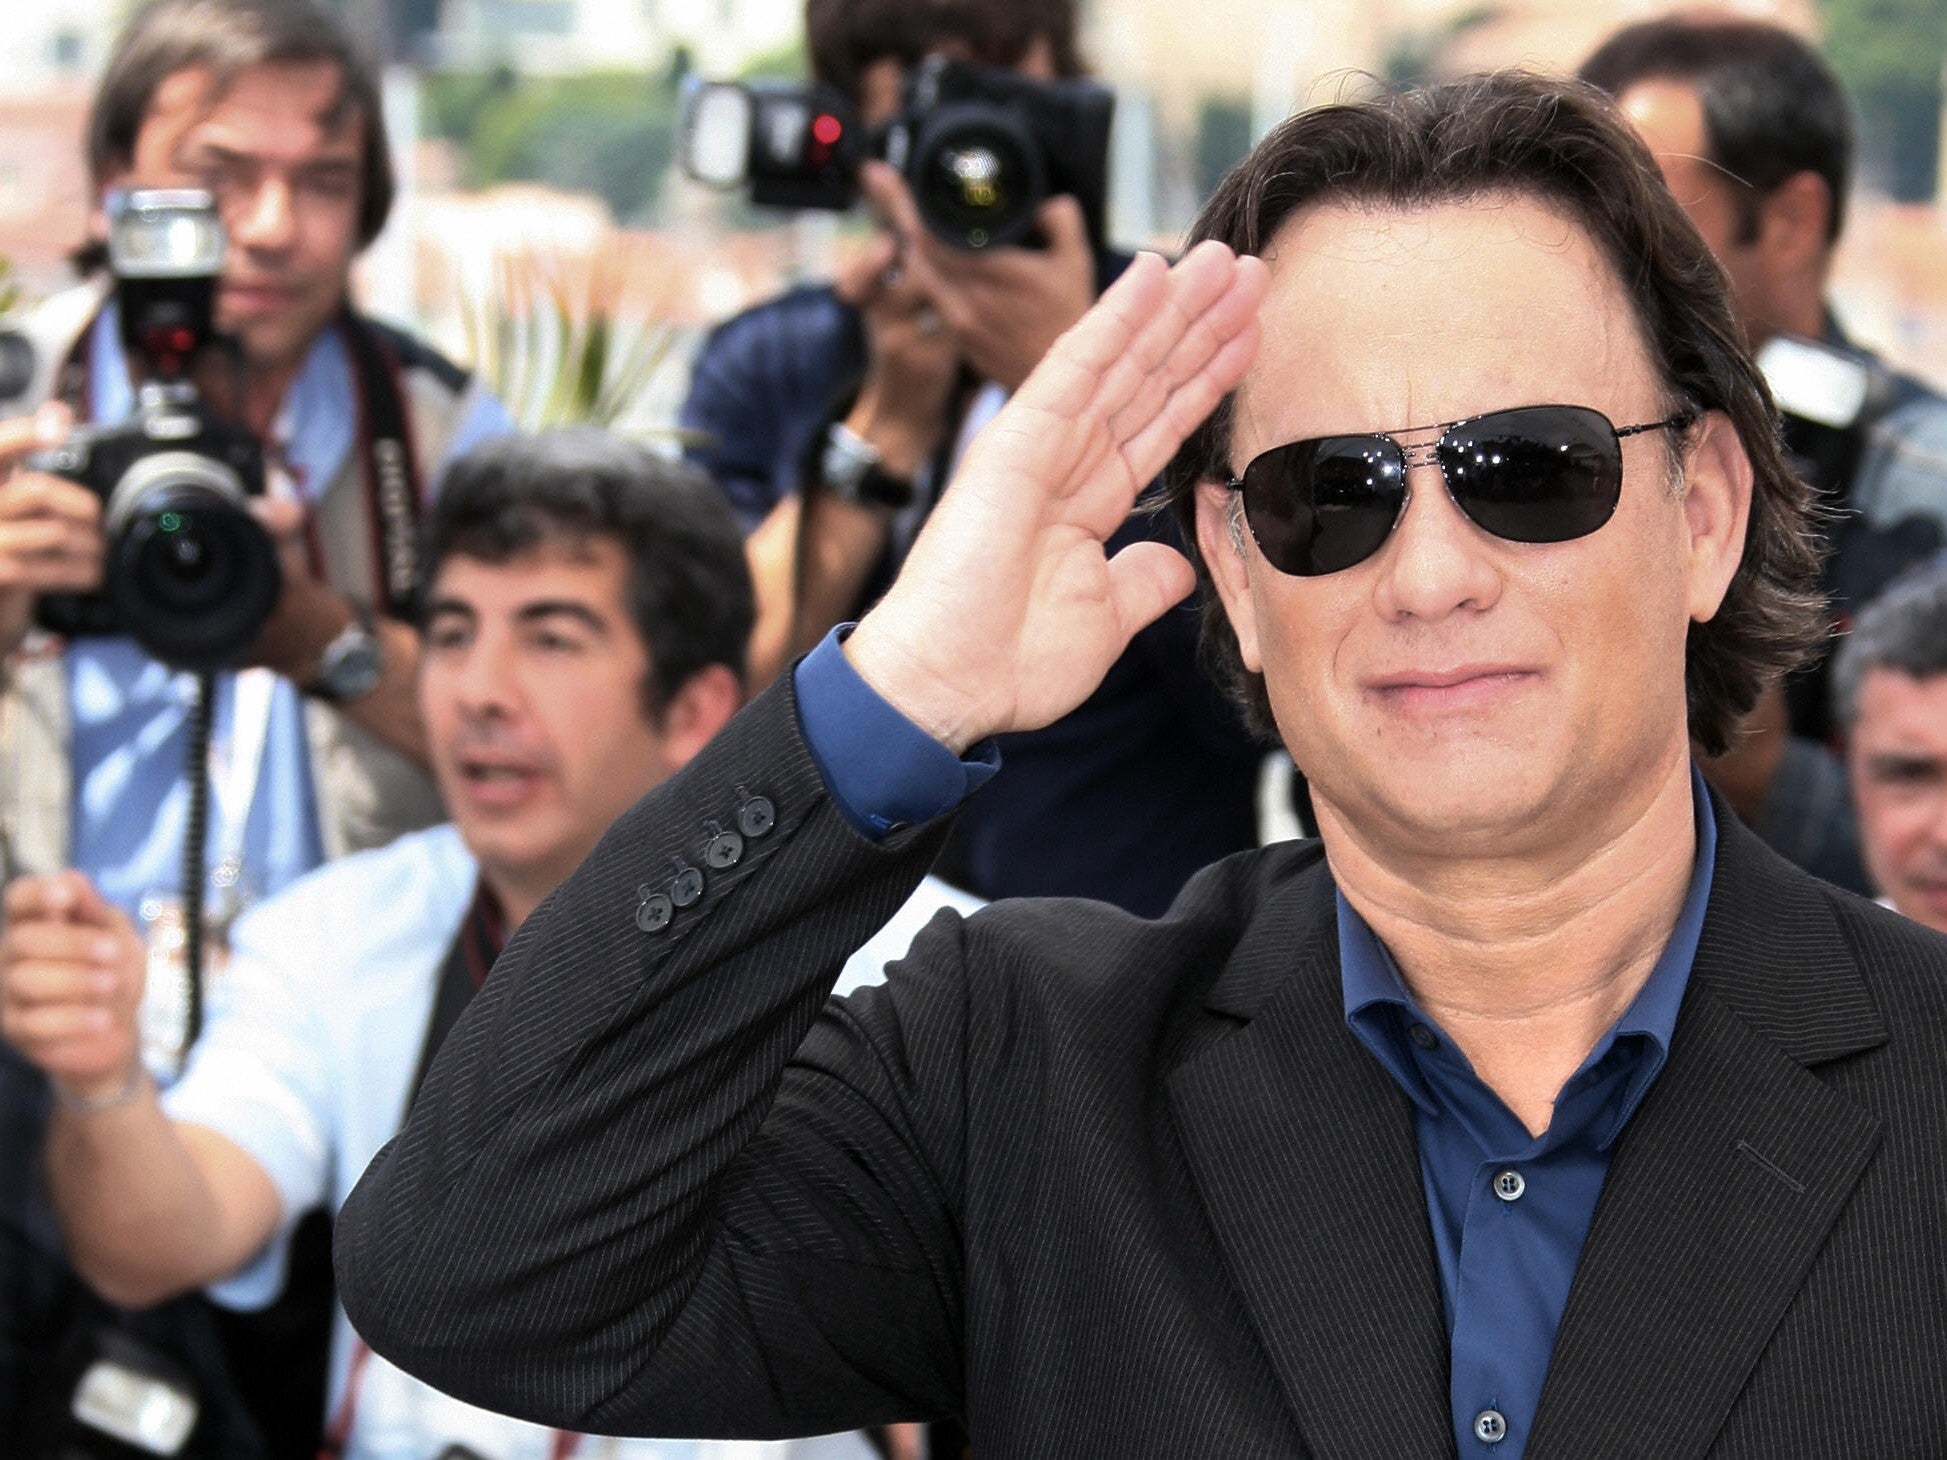 Tom Hanks promoting The Da Vinci Code at the 59th edition of the Cannes Film Festival in 2006